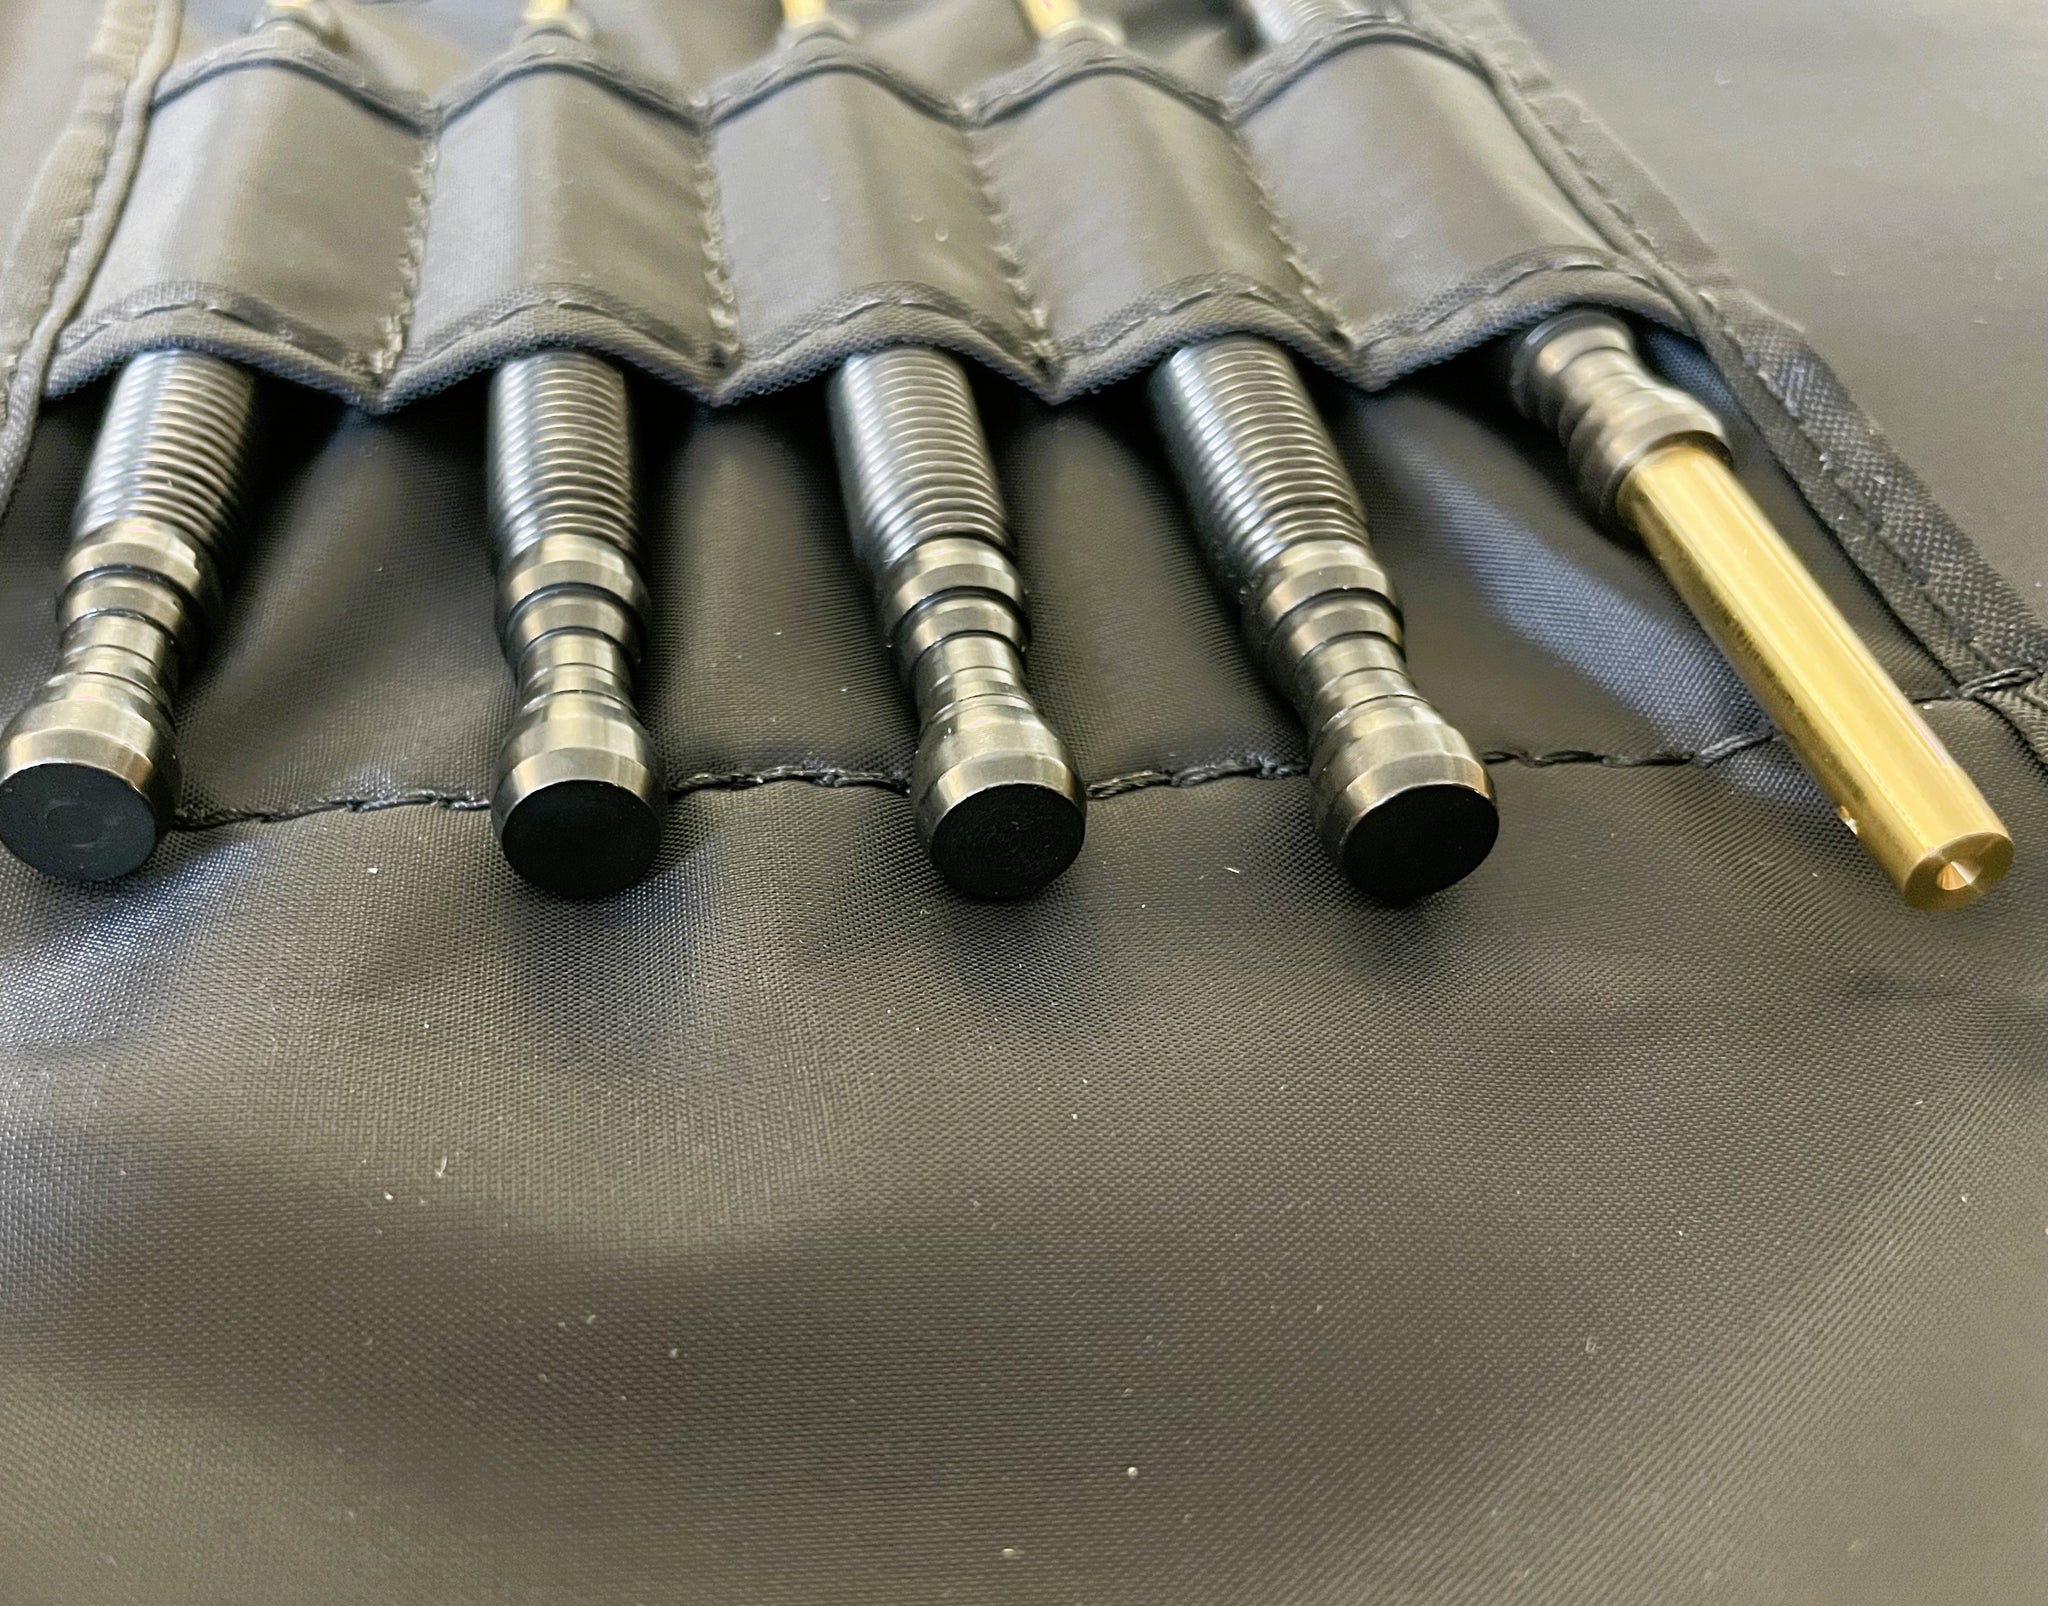 Full brass punch set with the AR-TT - AR TakeDown Tool